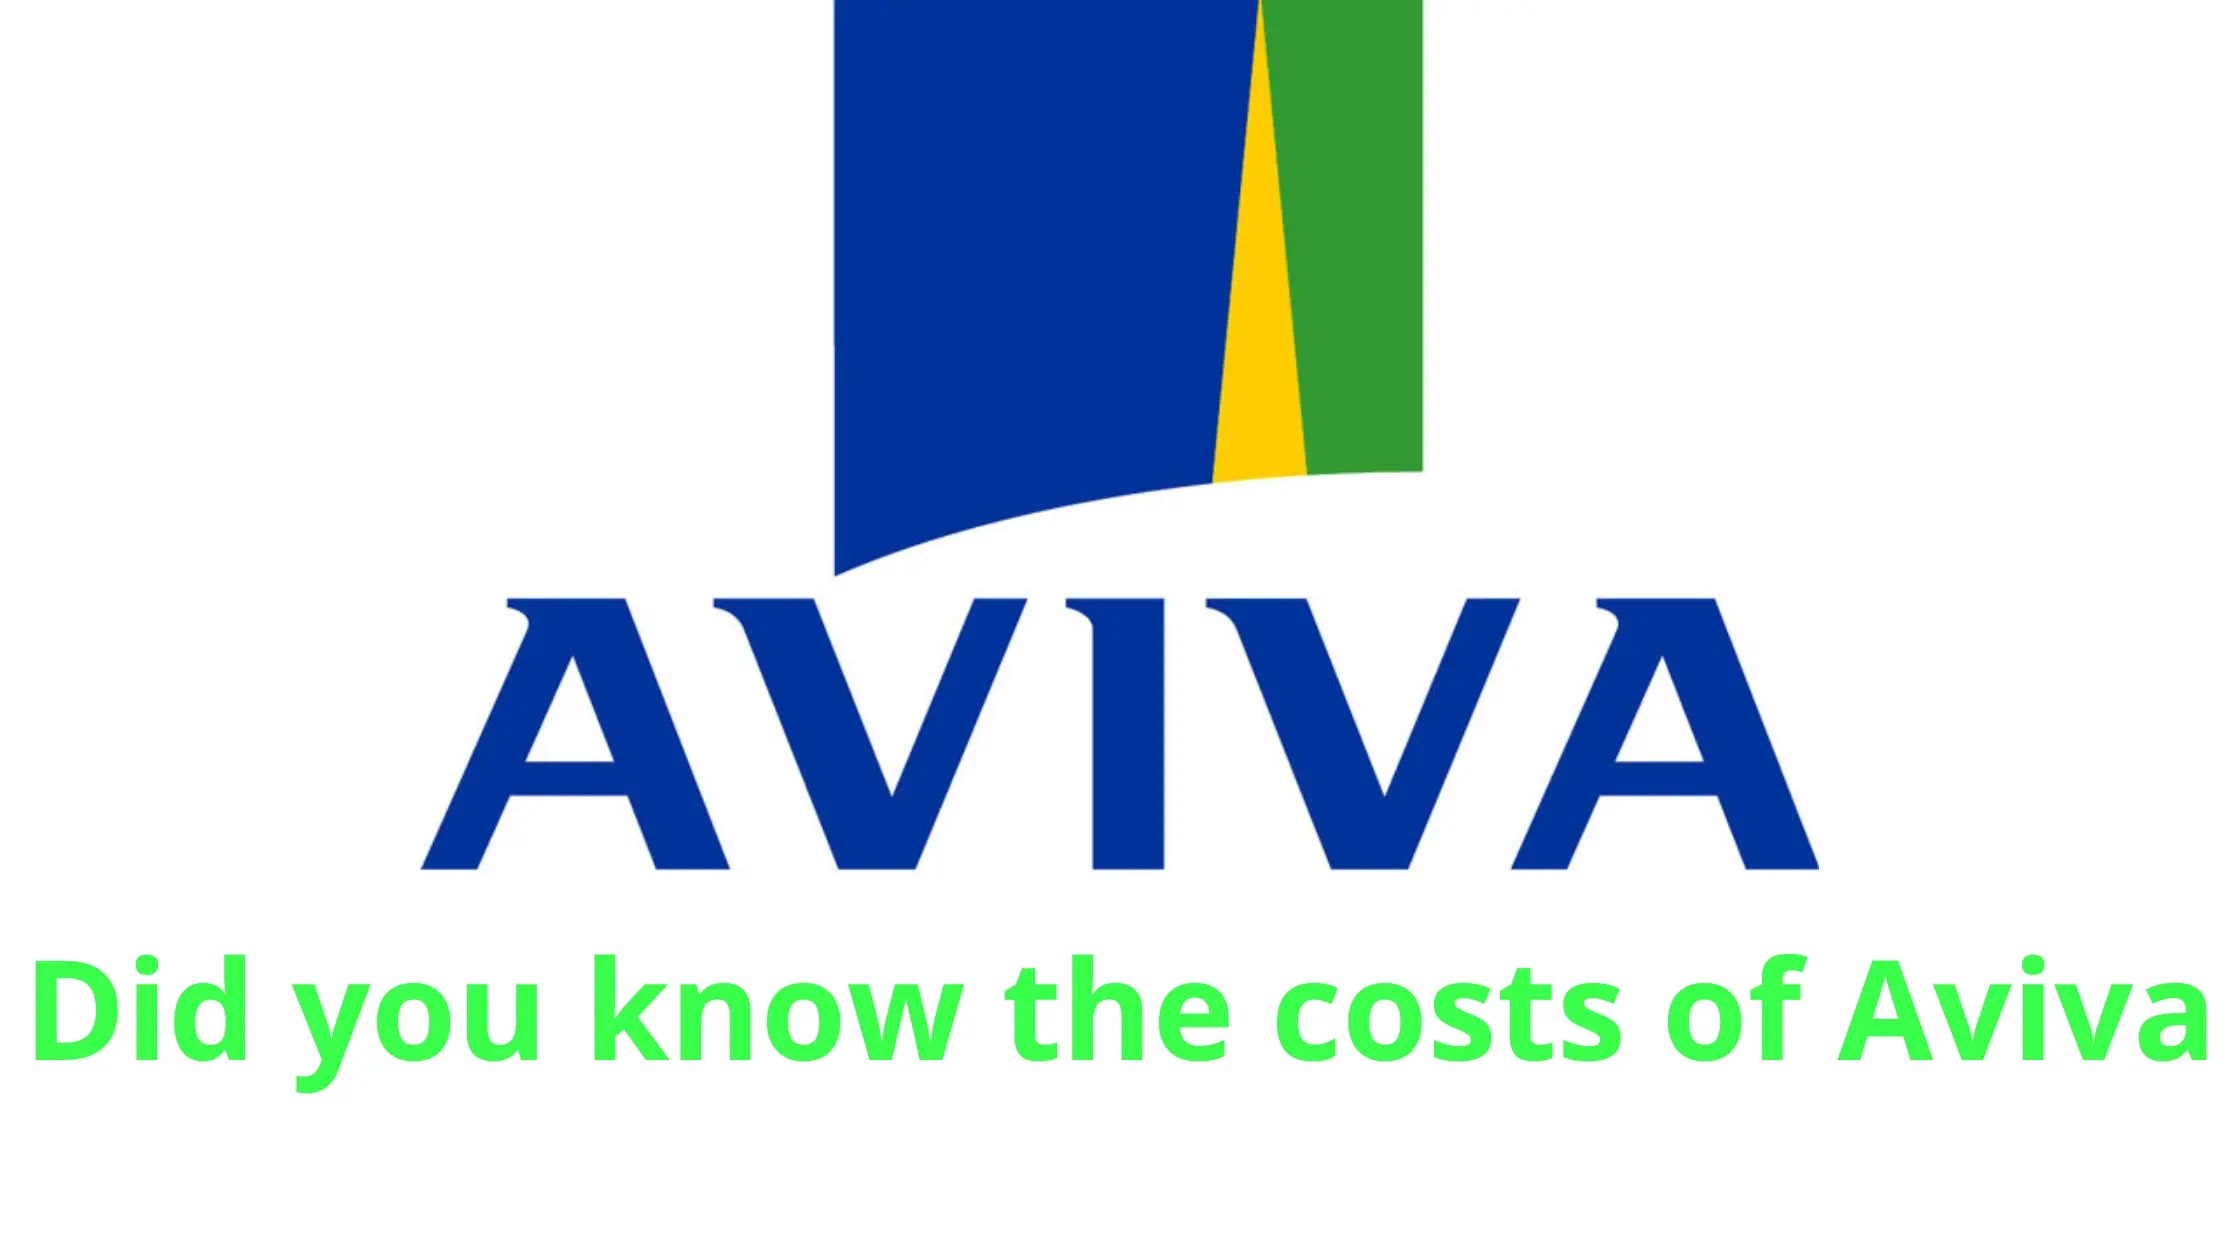 Did you know the costs of Aviva